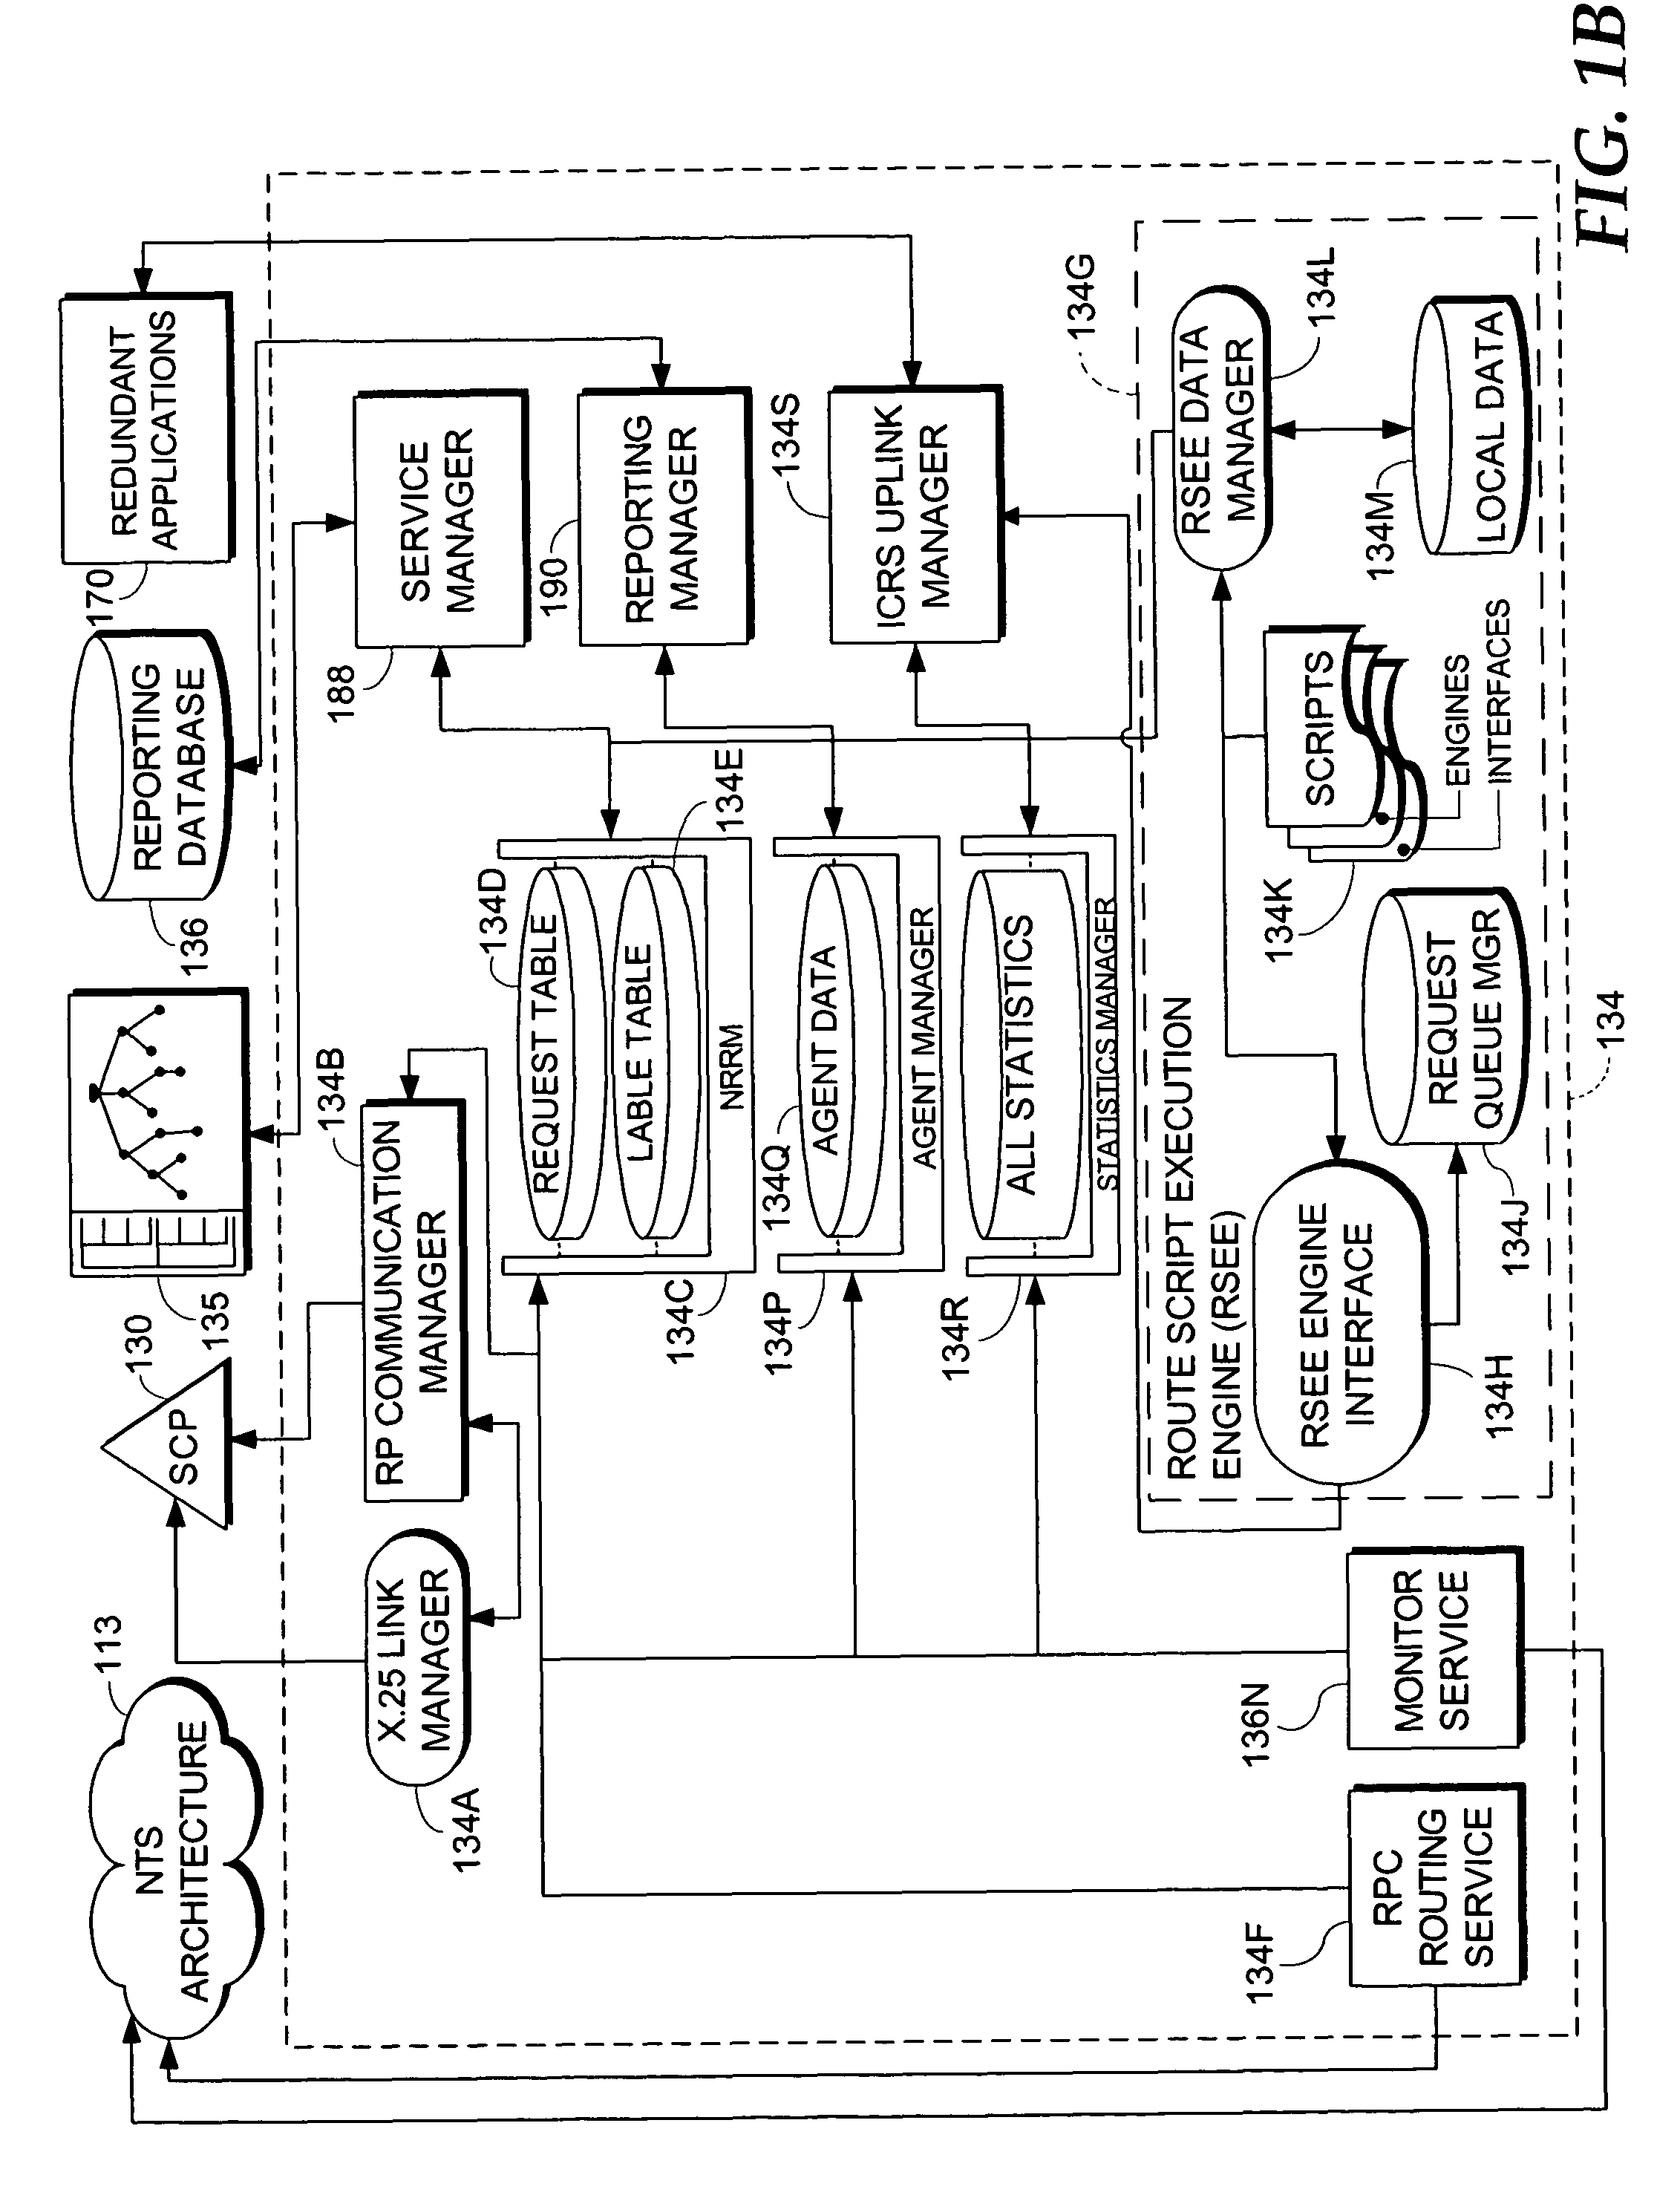 Call-routing system and method